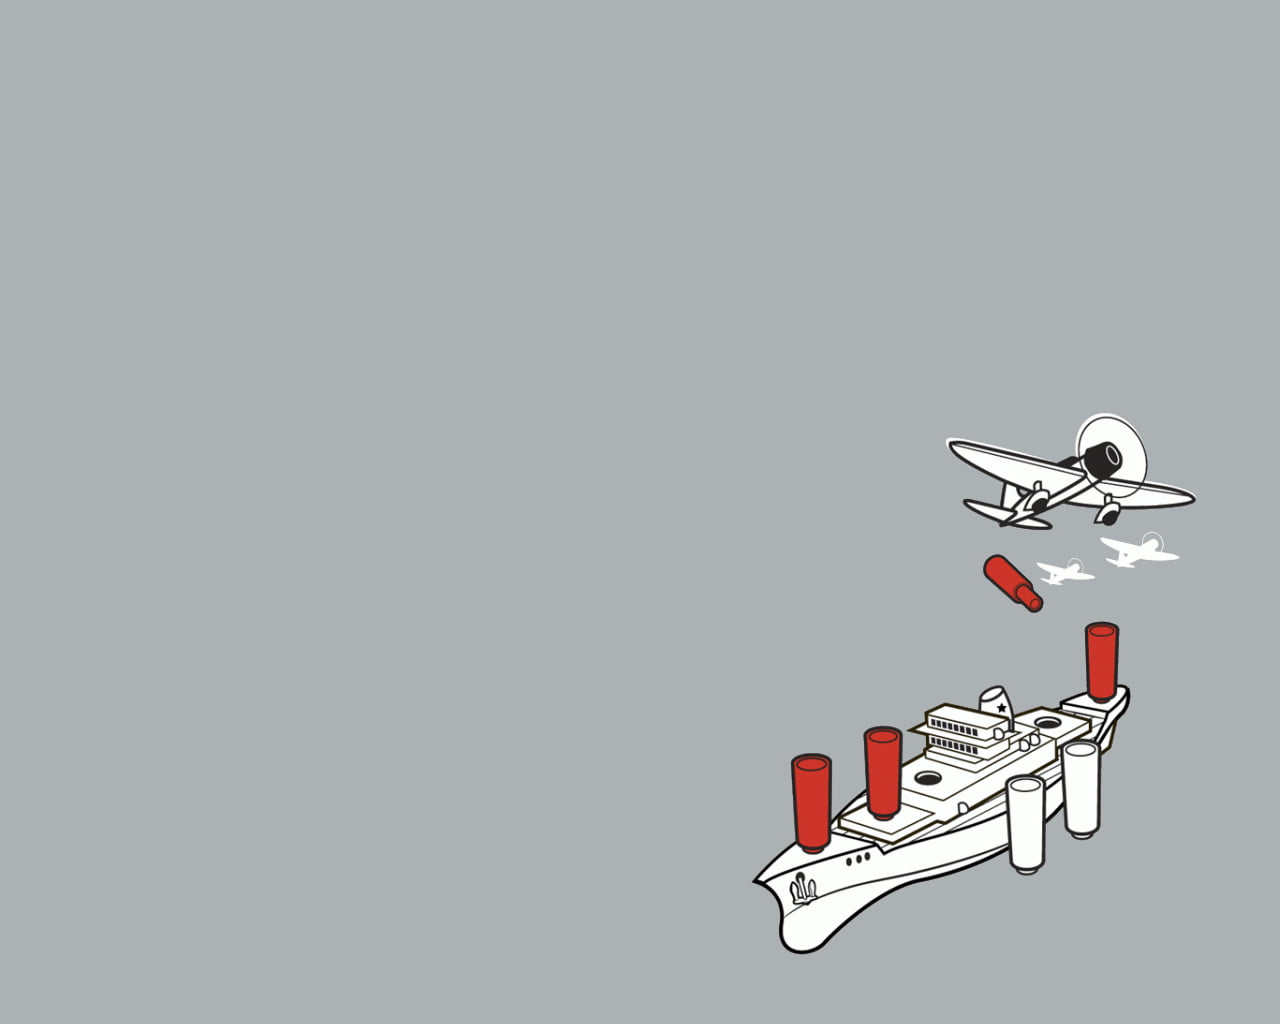 ship and aircraft illustration, threadless, simple, airplane